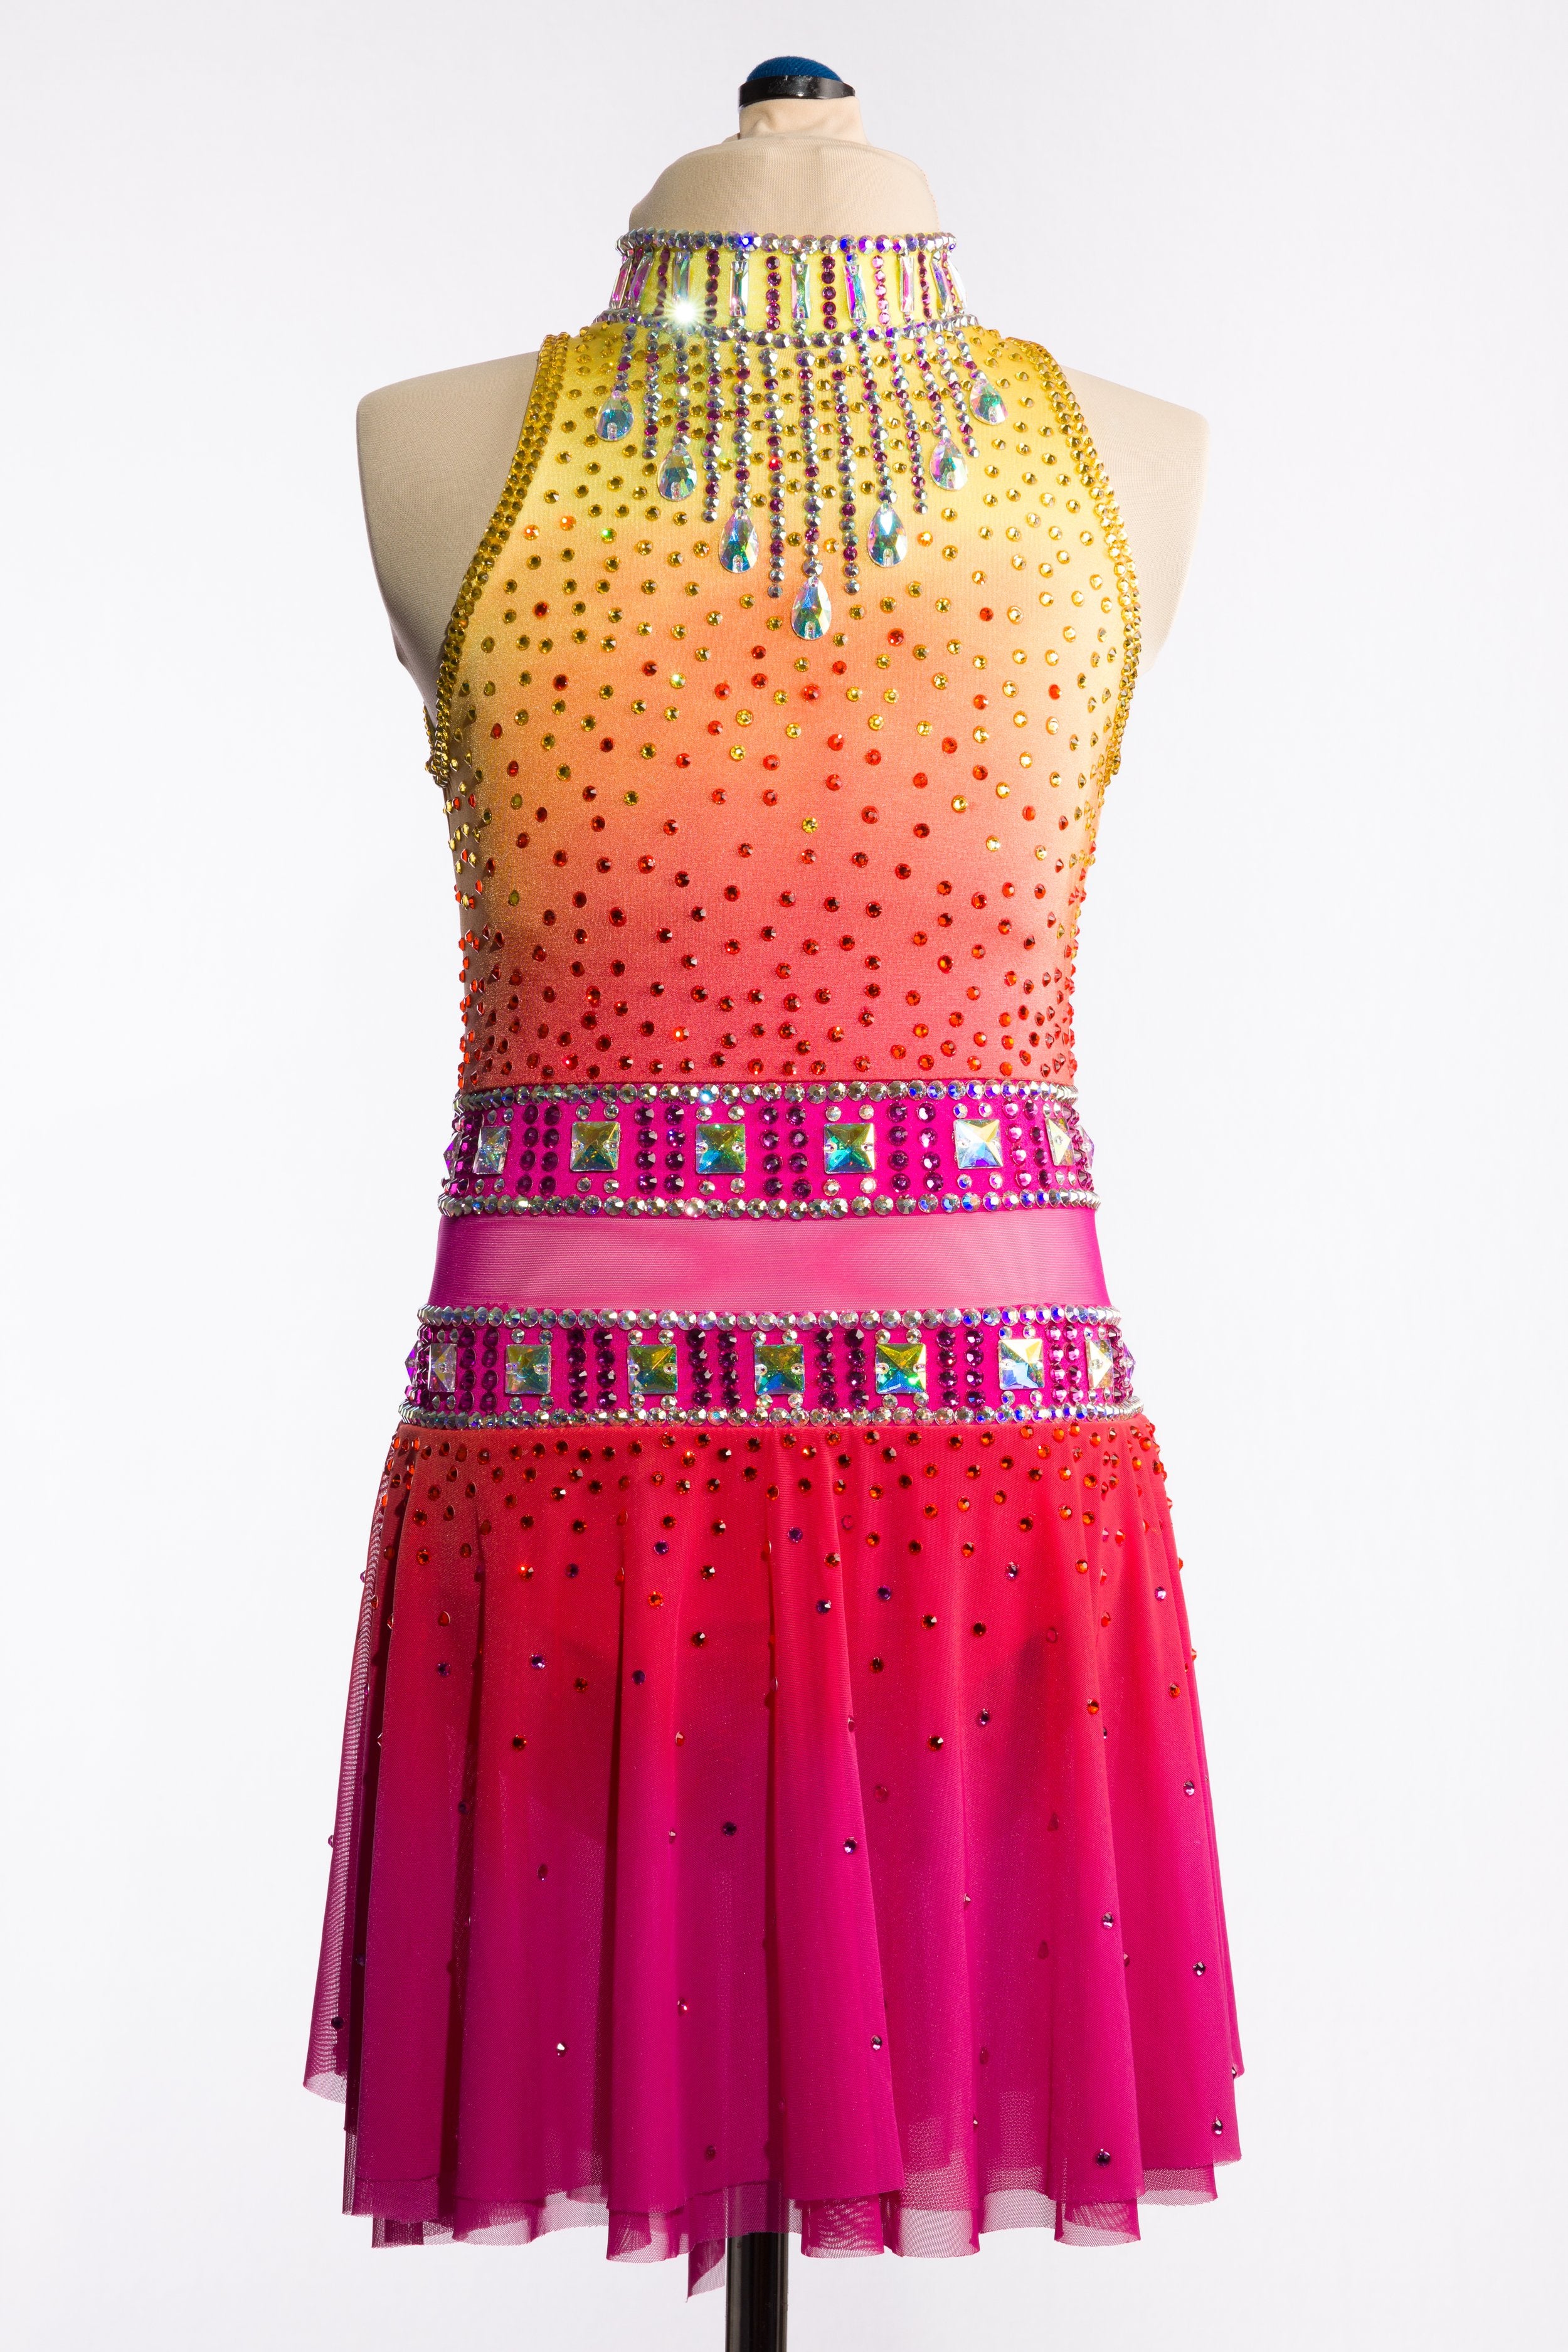 Fiery gradient raspberry to yellow dress with rhinestone accent bands